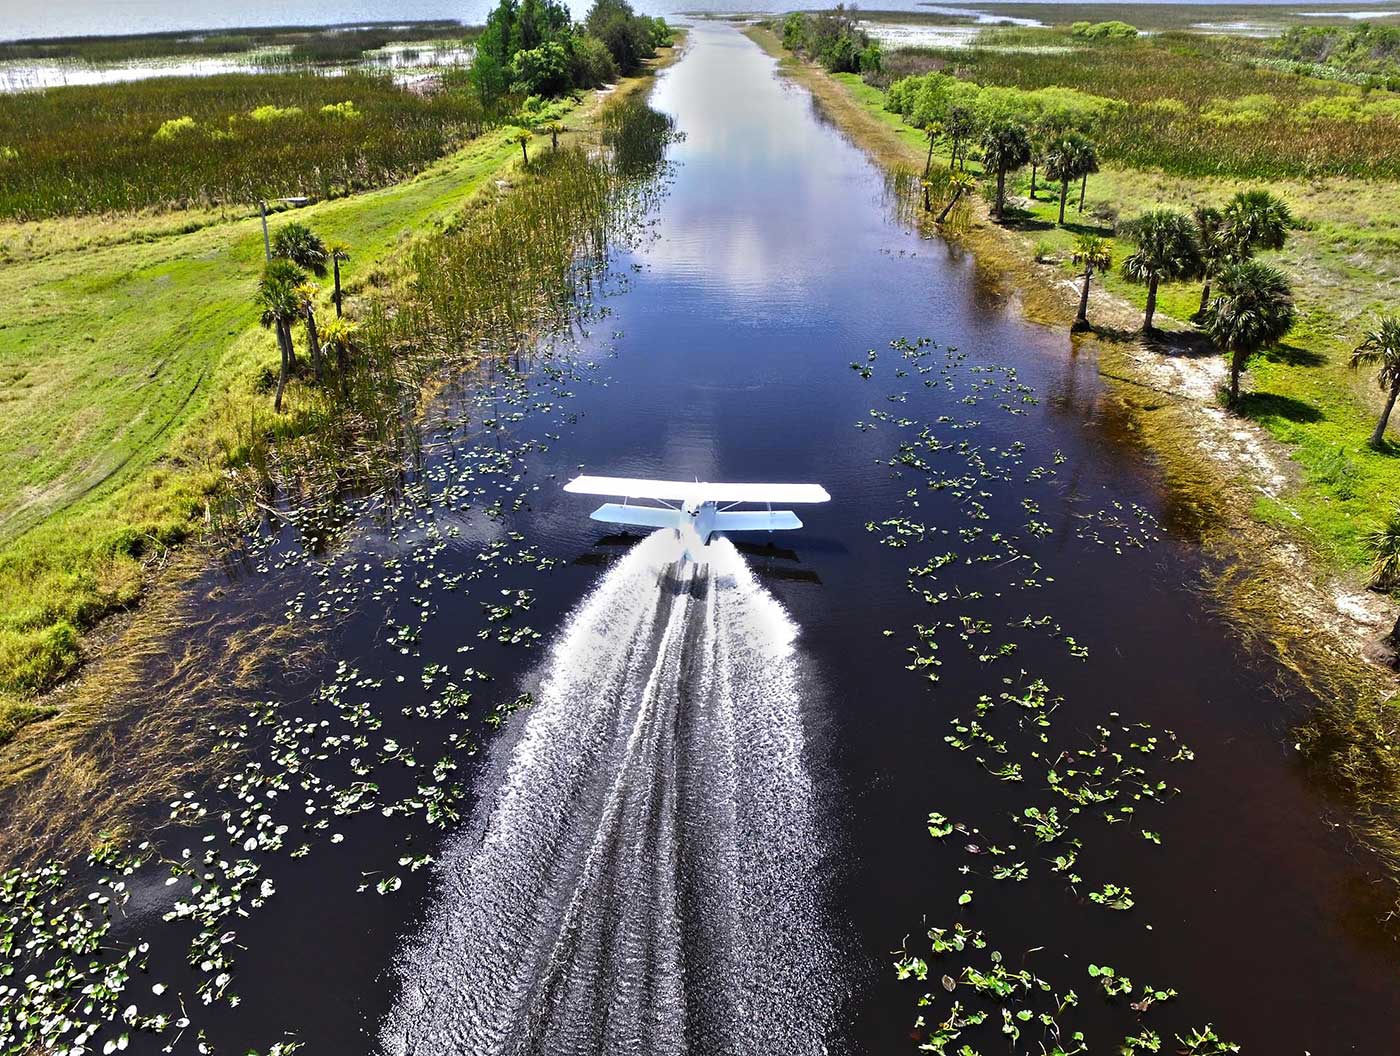 Taking off from a canal